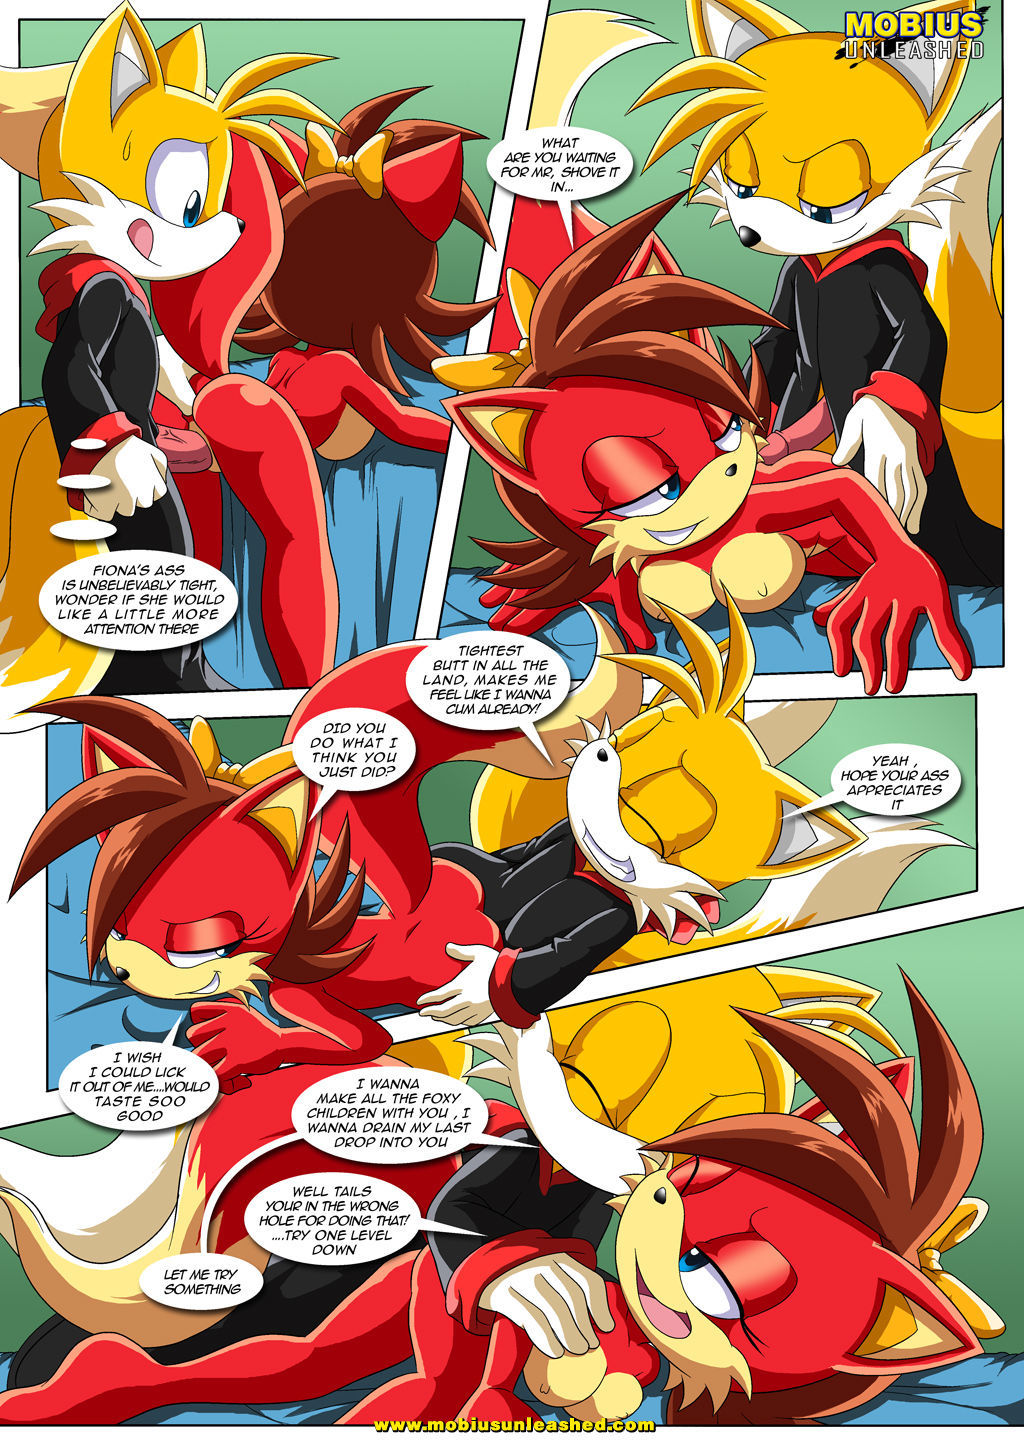 The Prower Family Affair (Sonic The Hedgehog) by Palcomix page 4